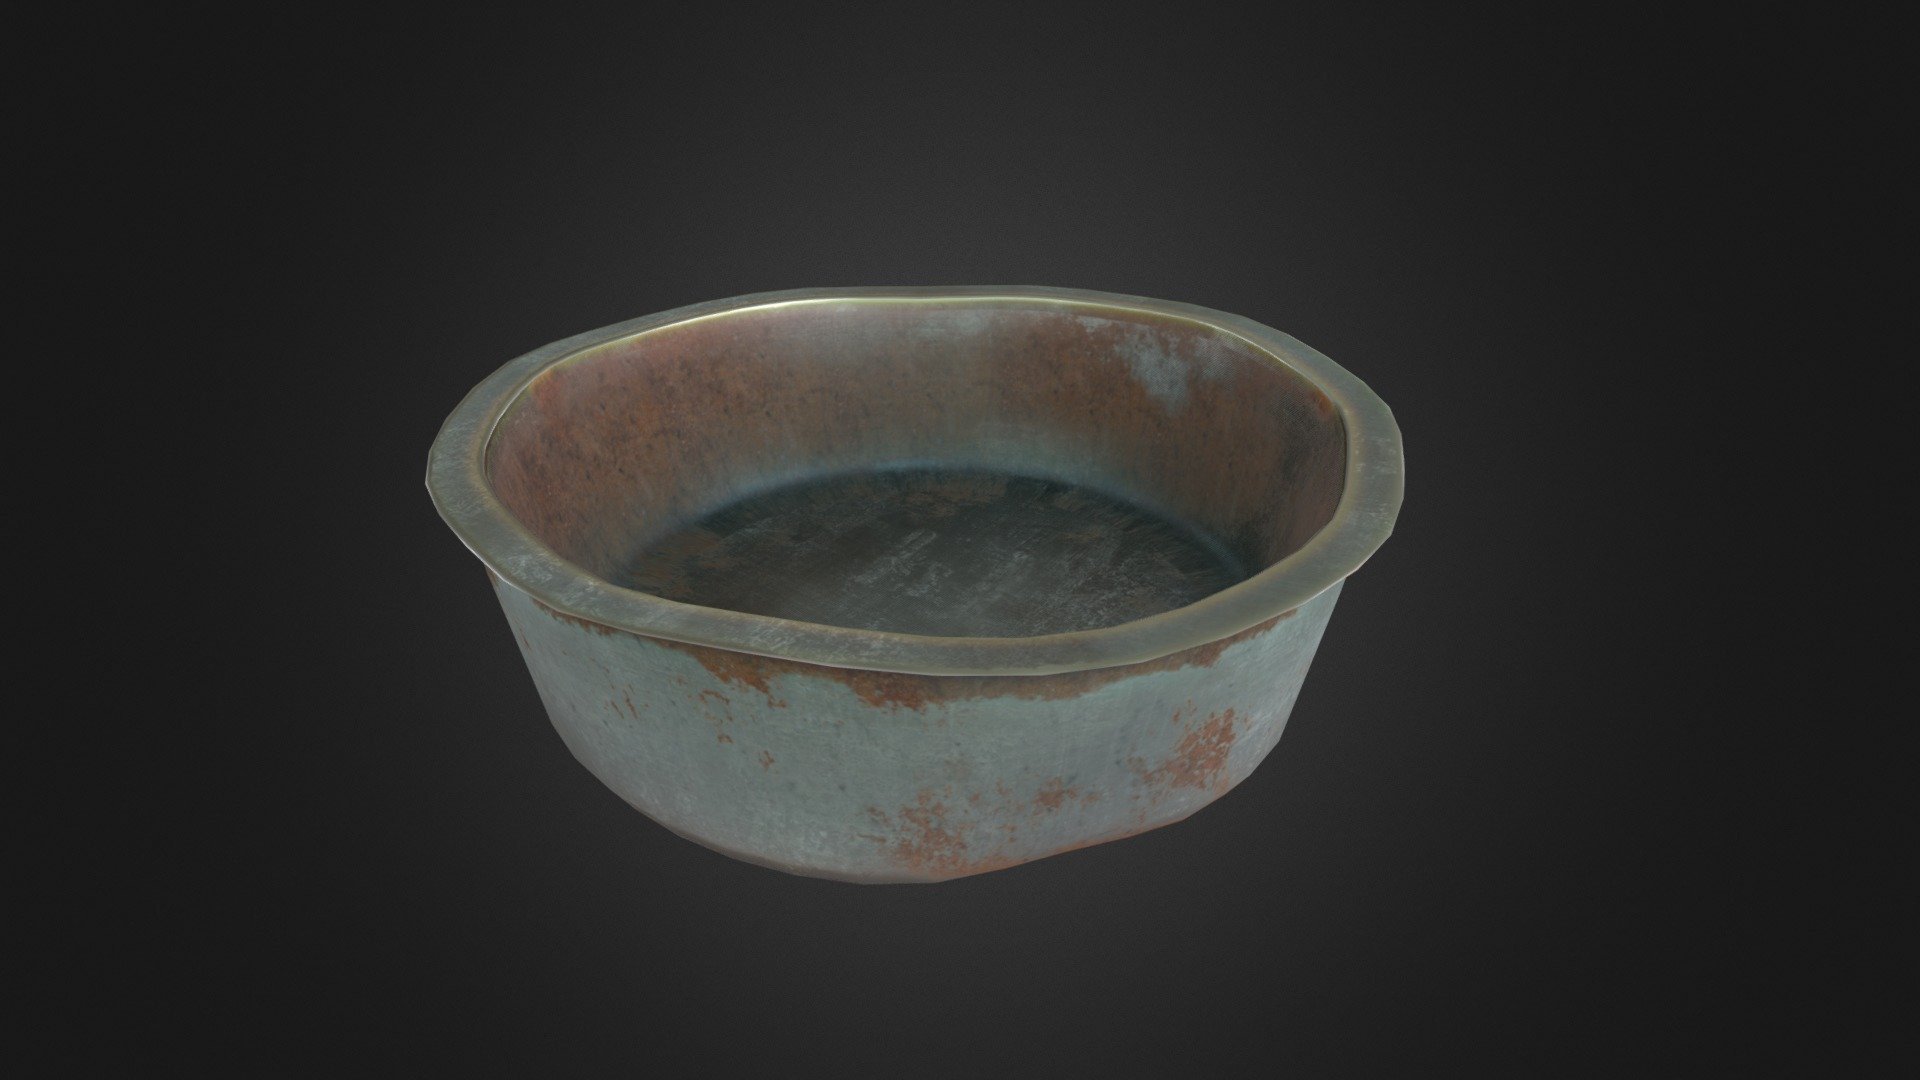 Old Rusted steel tub created for a game scene - Low poly Old Rusted Tub - 3D model by shubhjain868 3d model